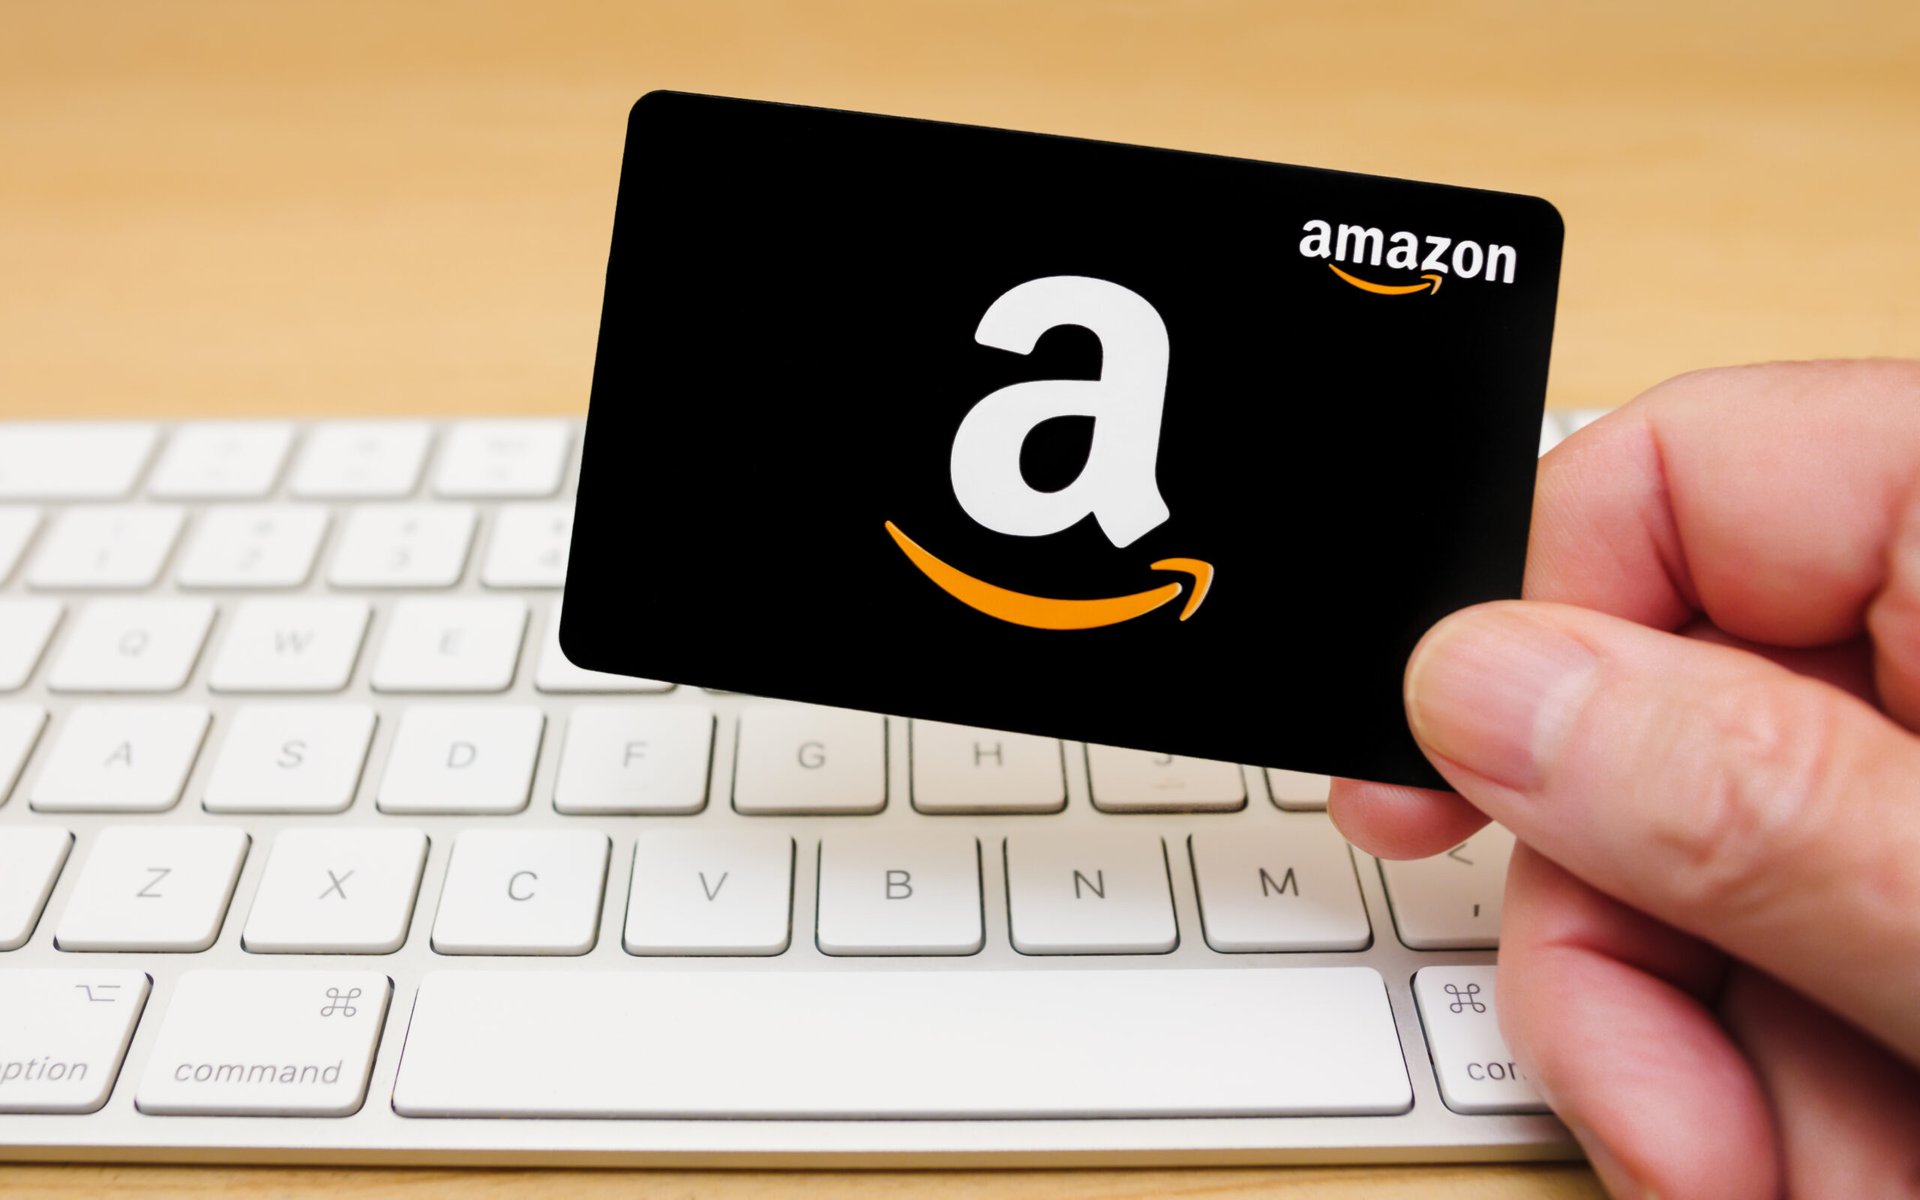 Amazon gift card in front of keyboard